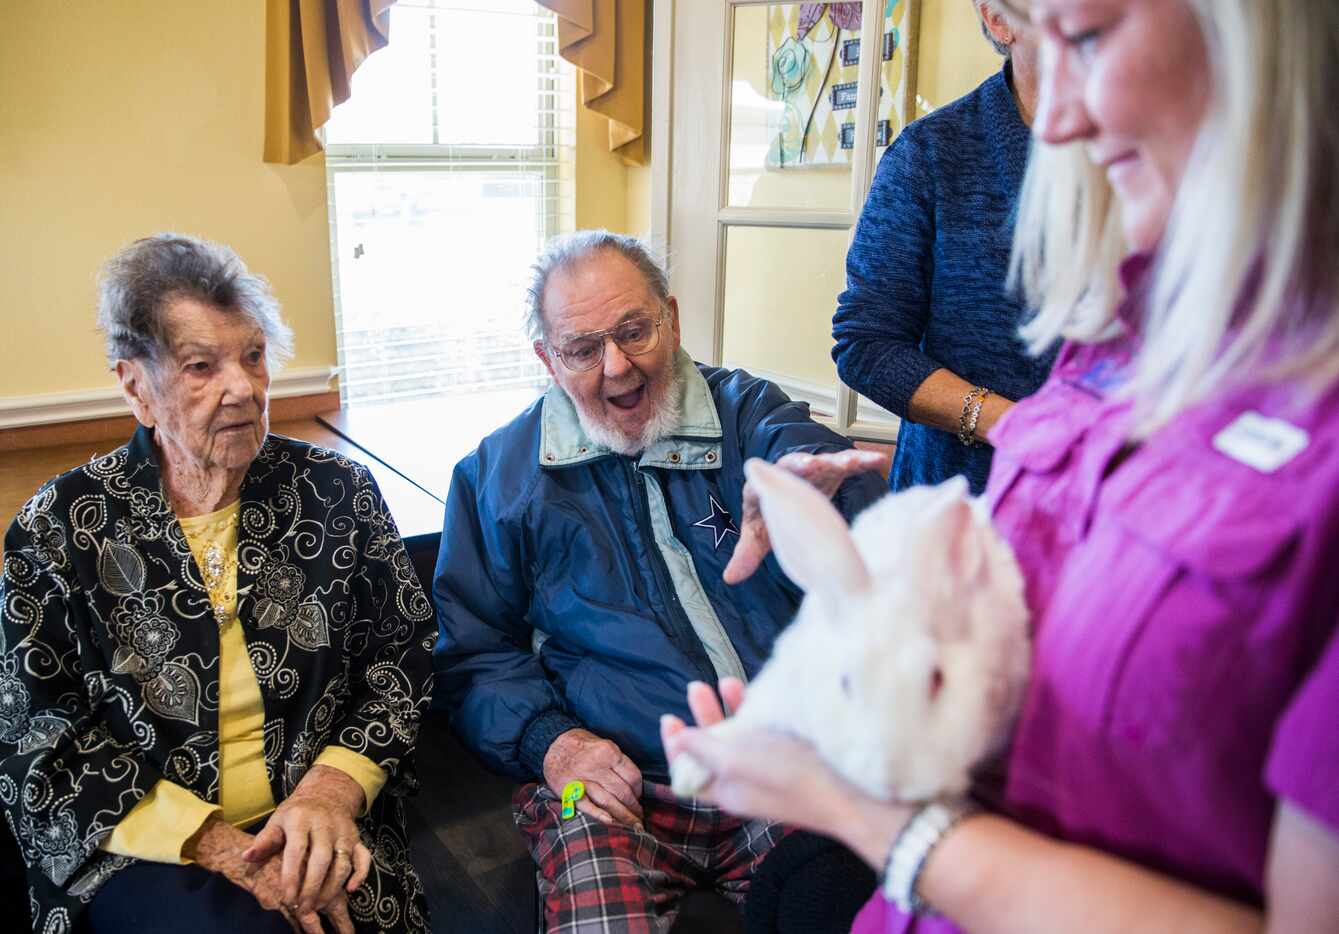 Jerry Holdridge, center, reacts to touching Snow the rabbit as Stacy Danby, right, of ARoo4U...